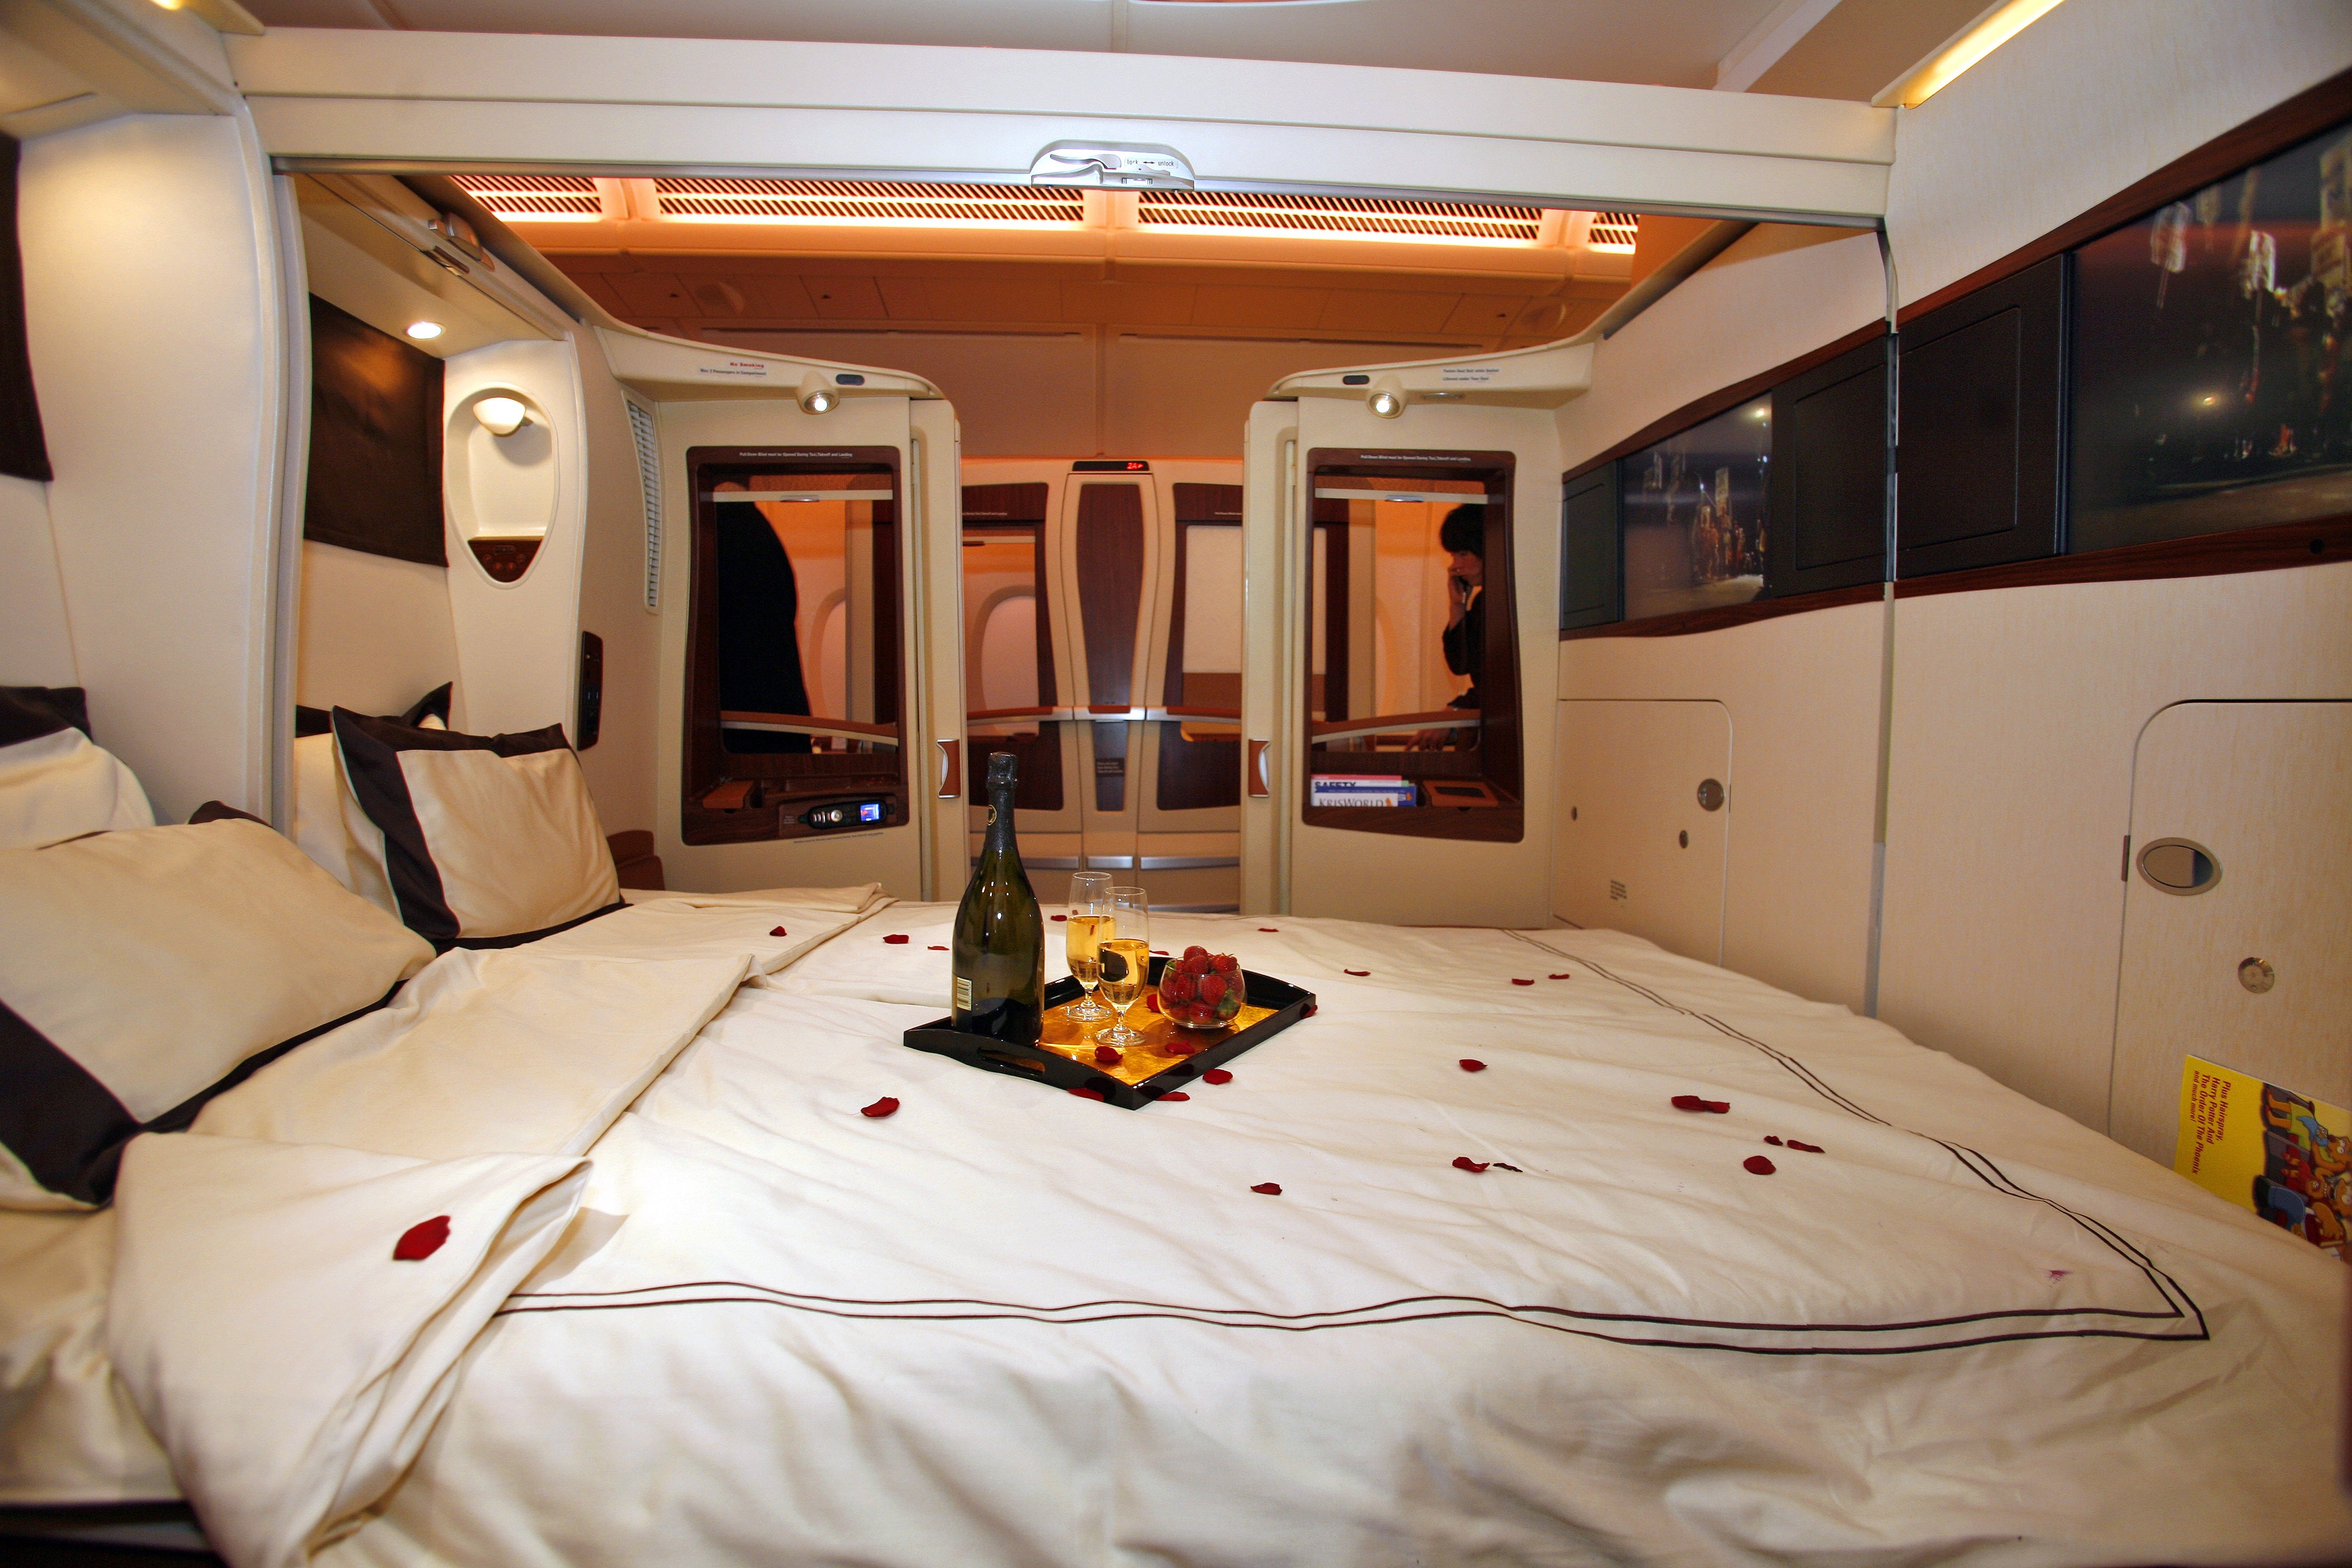 TOULOUSE, FRANCE - OCTOBER 15: A general view of inside the first class twin cabin section of the new Singapre Airlines Airbus A380 on October 15, 2007 in Toulouse, France. The first A380, the world's biggest passenger jet, is set to enter commercial service when delivered to Singapore Airlines' fleet, following a troubled production and an 18 month delay. (Photo by Pascal Parrot/Getty Images)